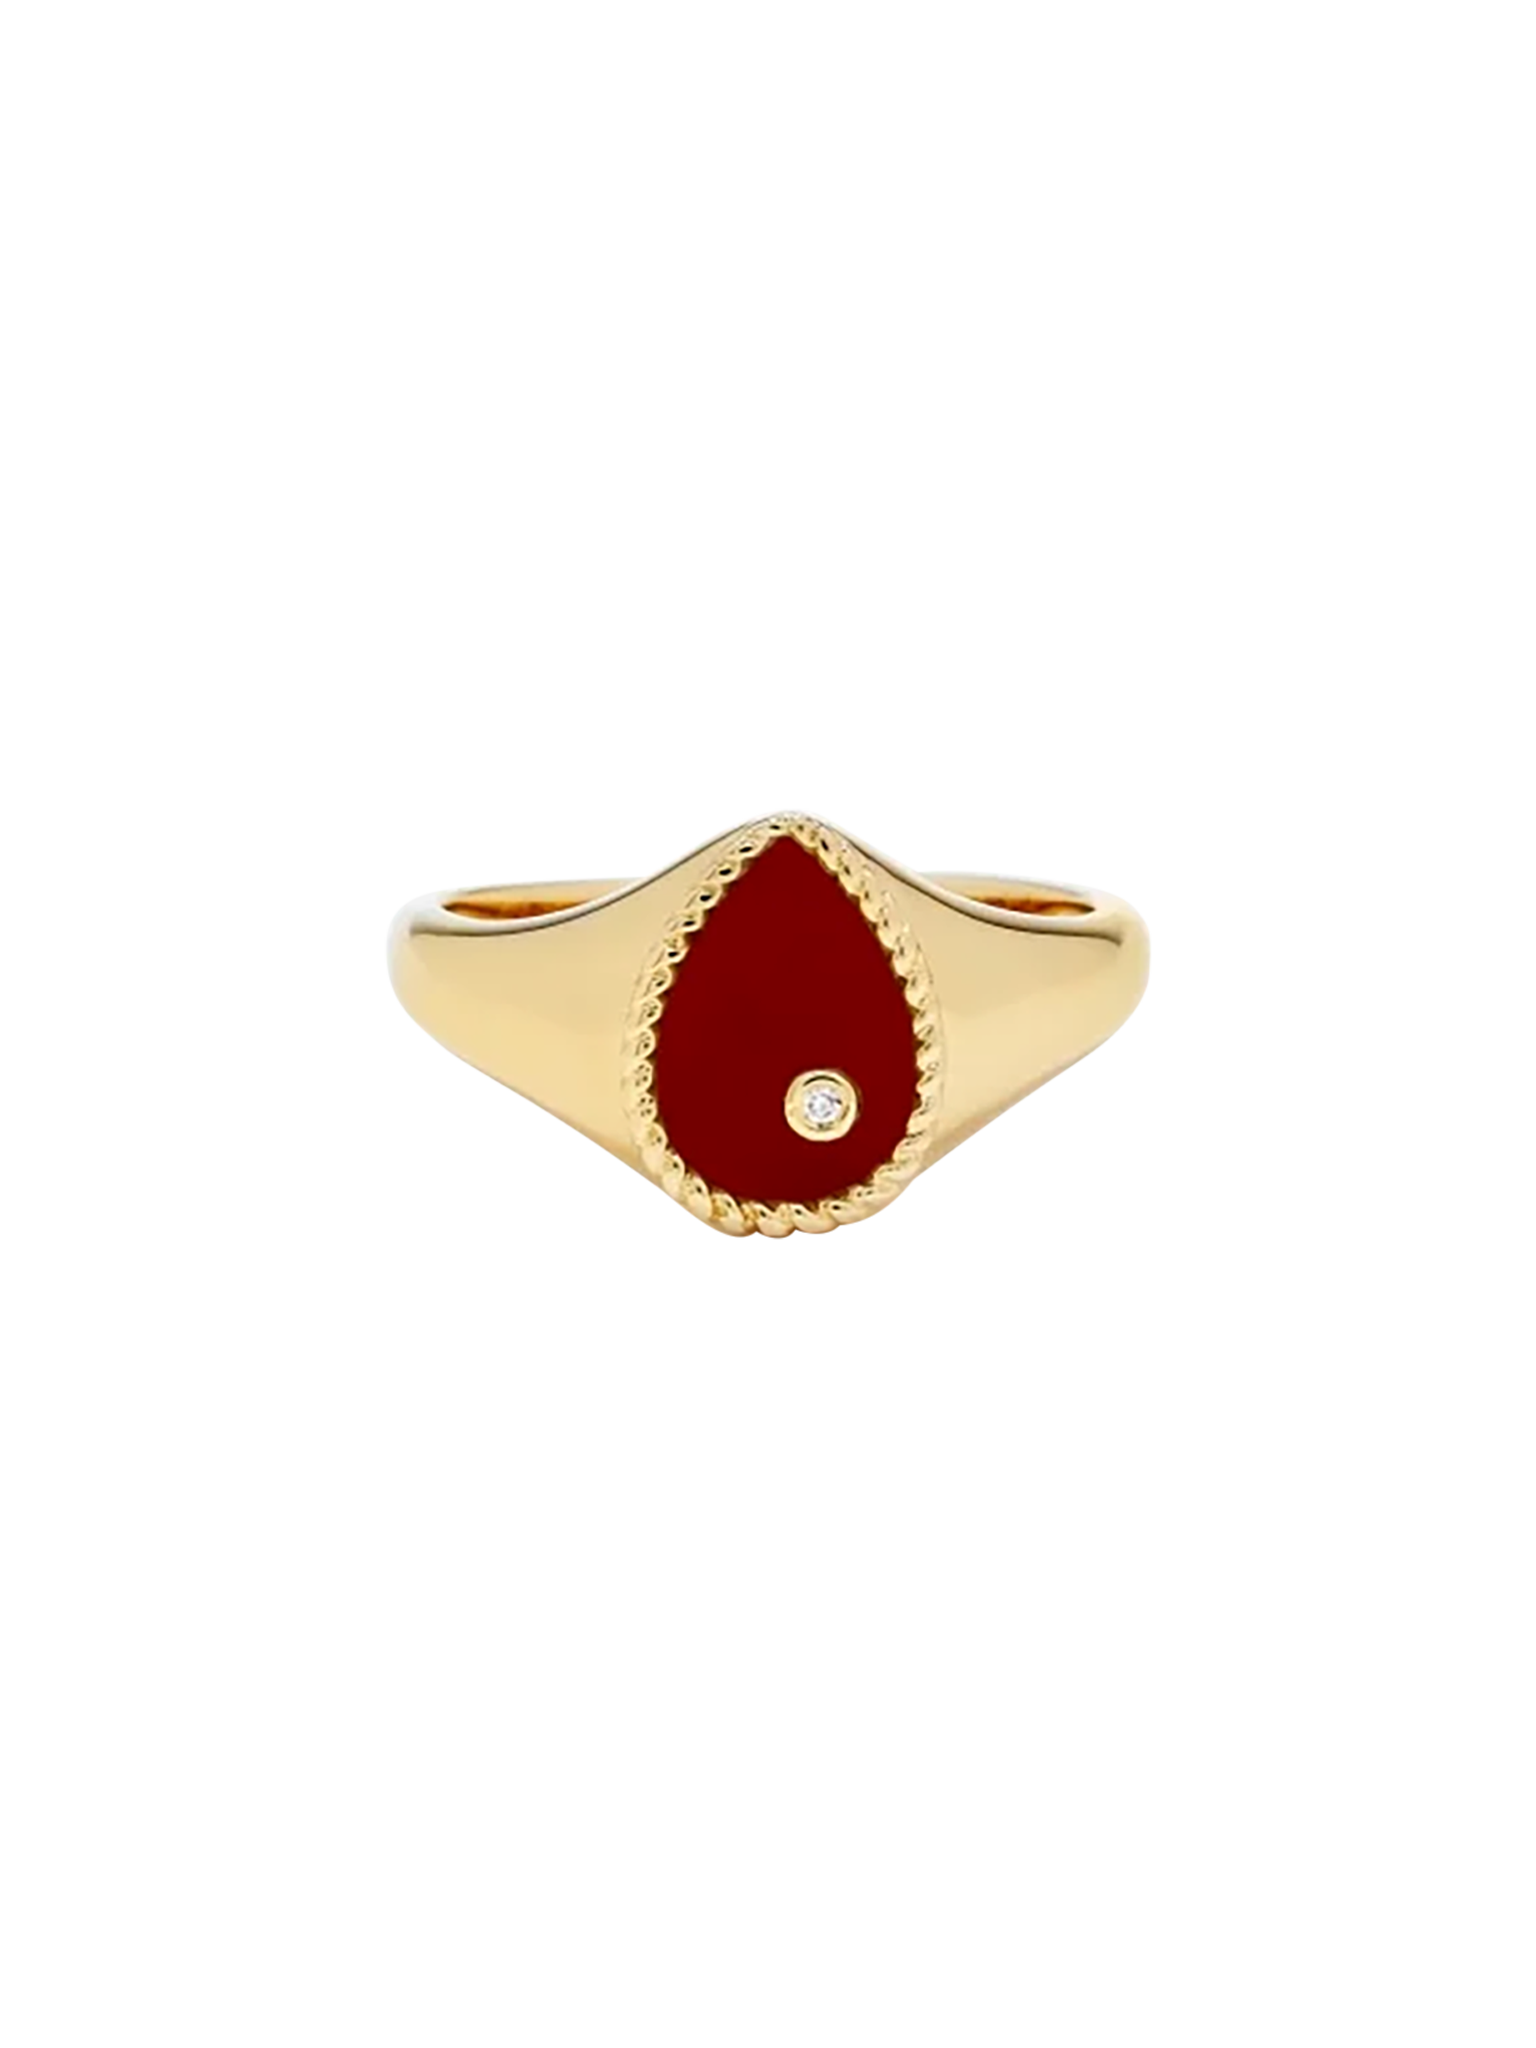 Baby chevalière poire agate rouge or jaune ring